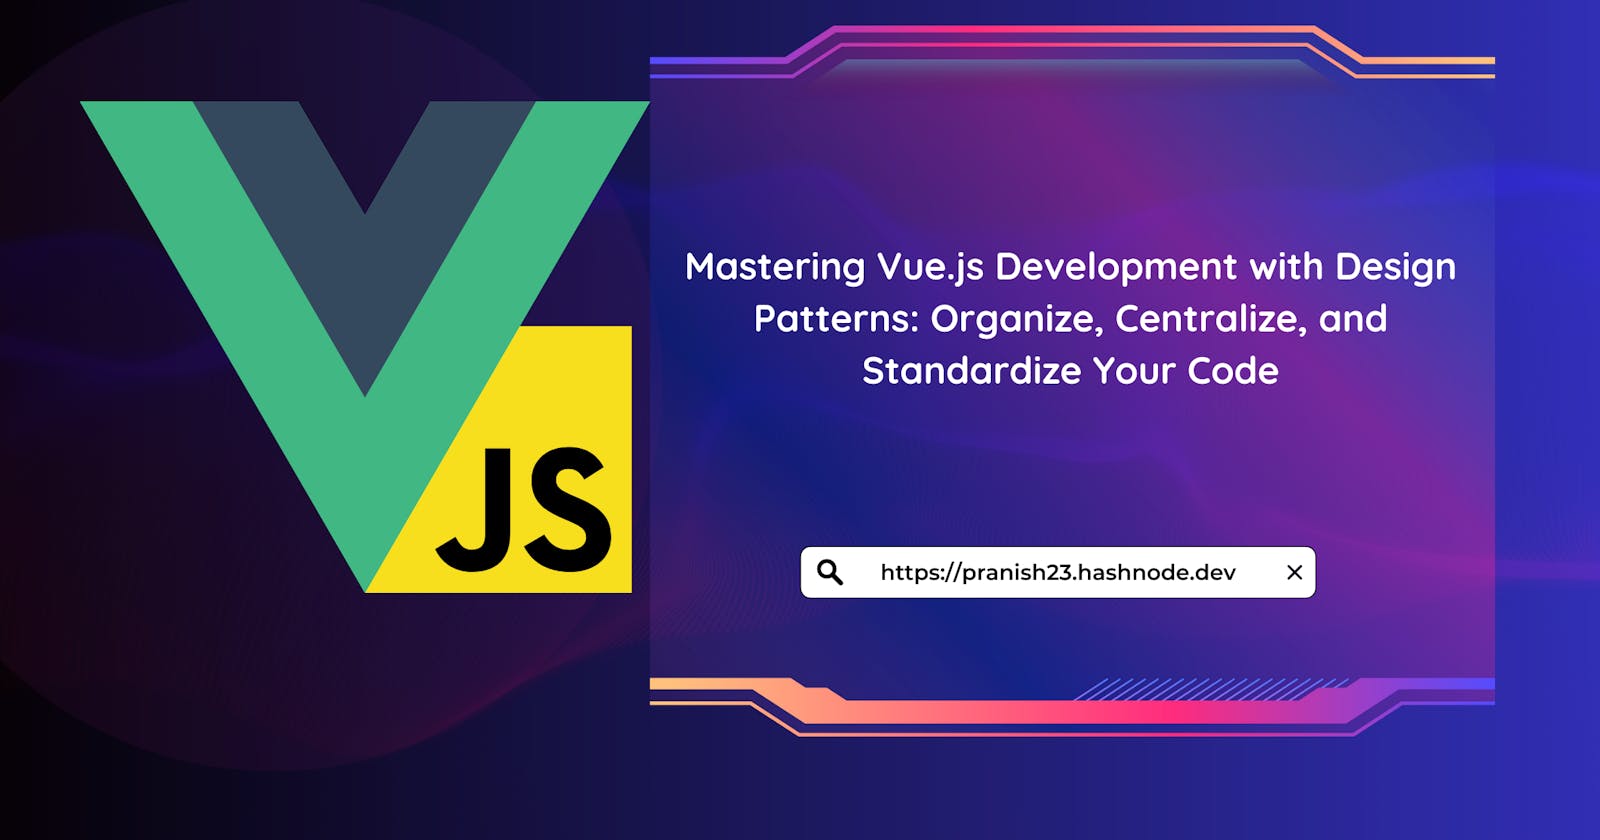 Mastering Vue.js Development with Design Patterns: Organize, Centralize, and Standardize Your Code